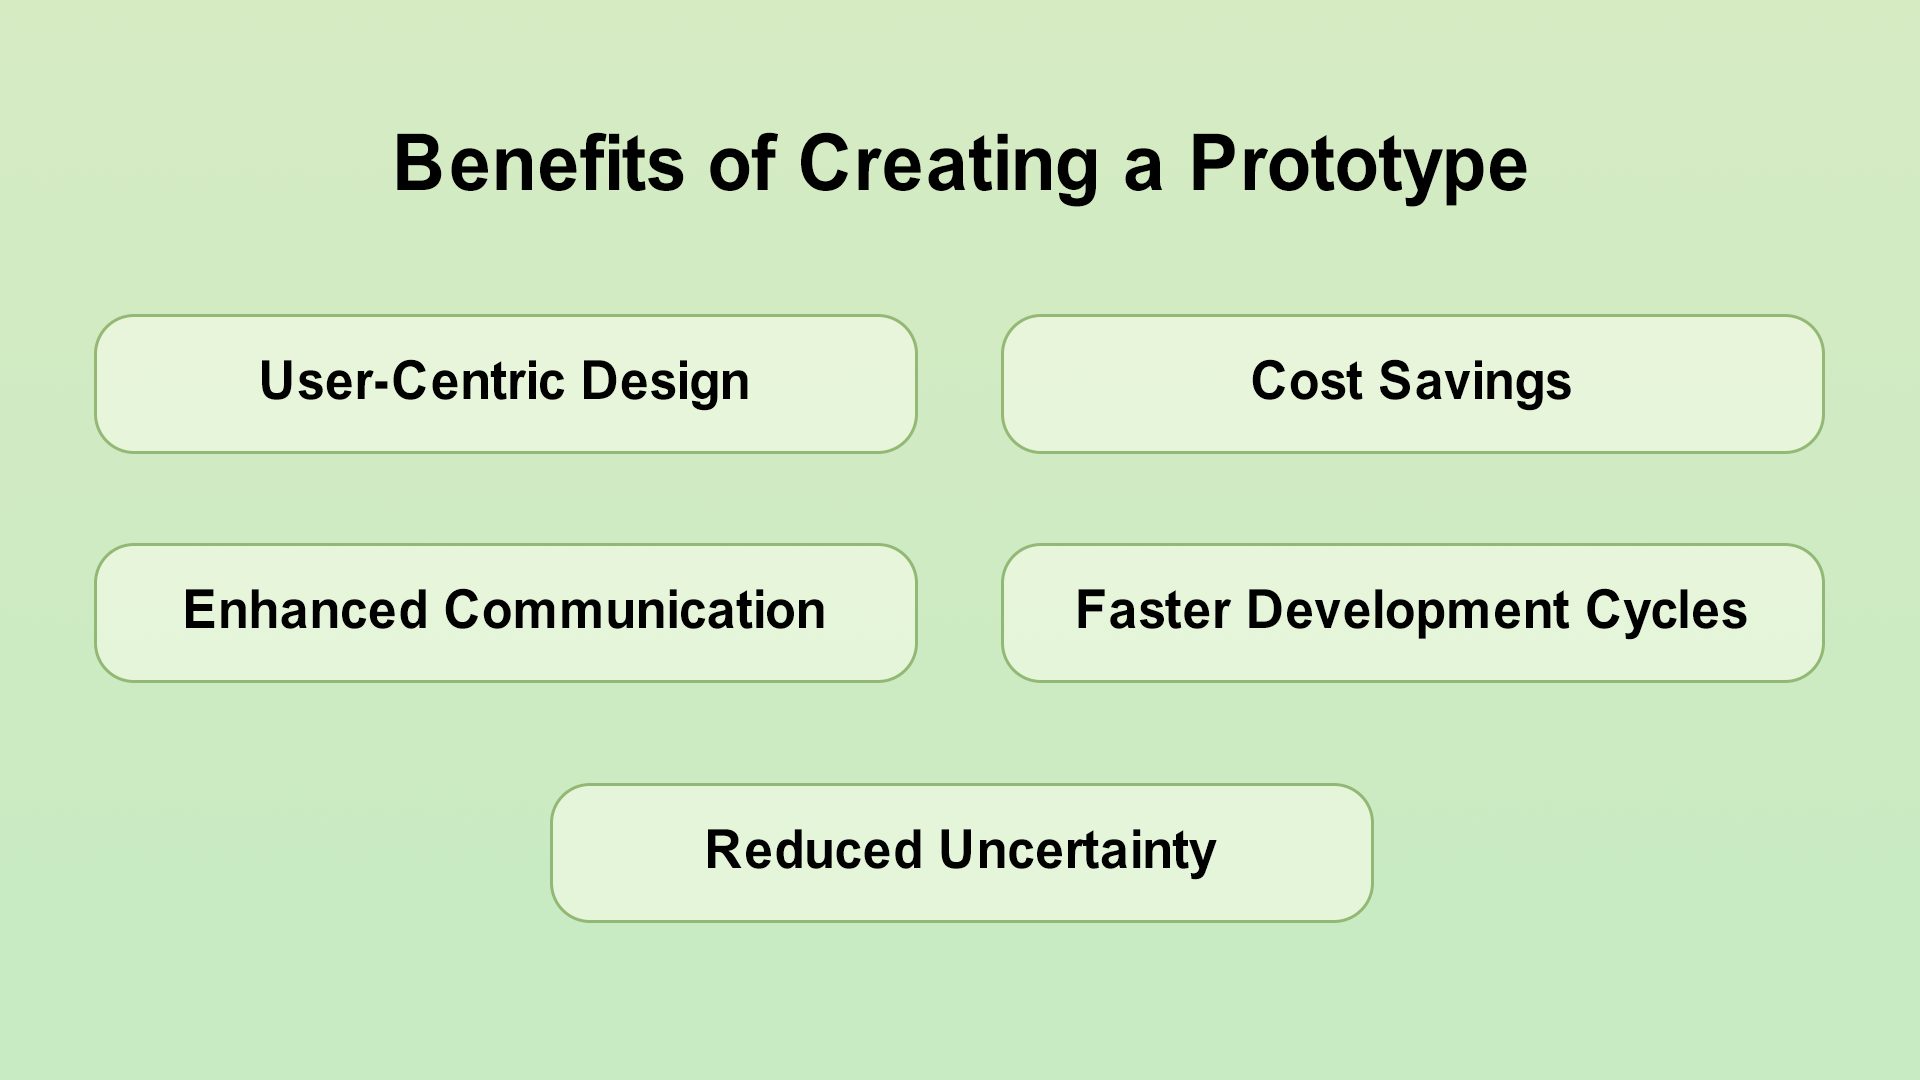 Benefits of Creating a Prototype